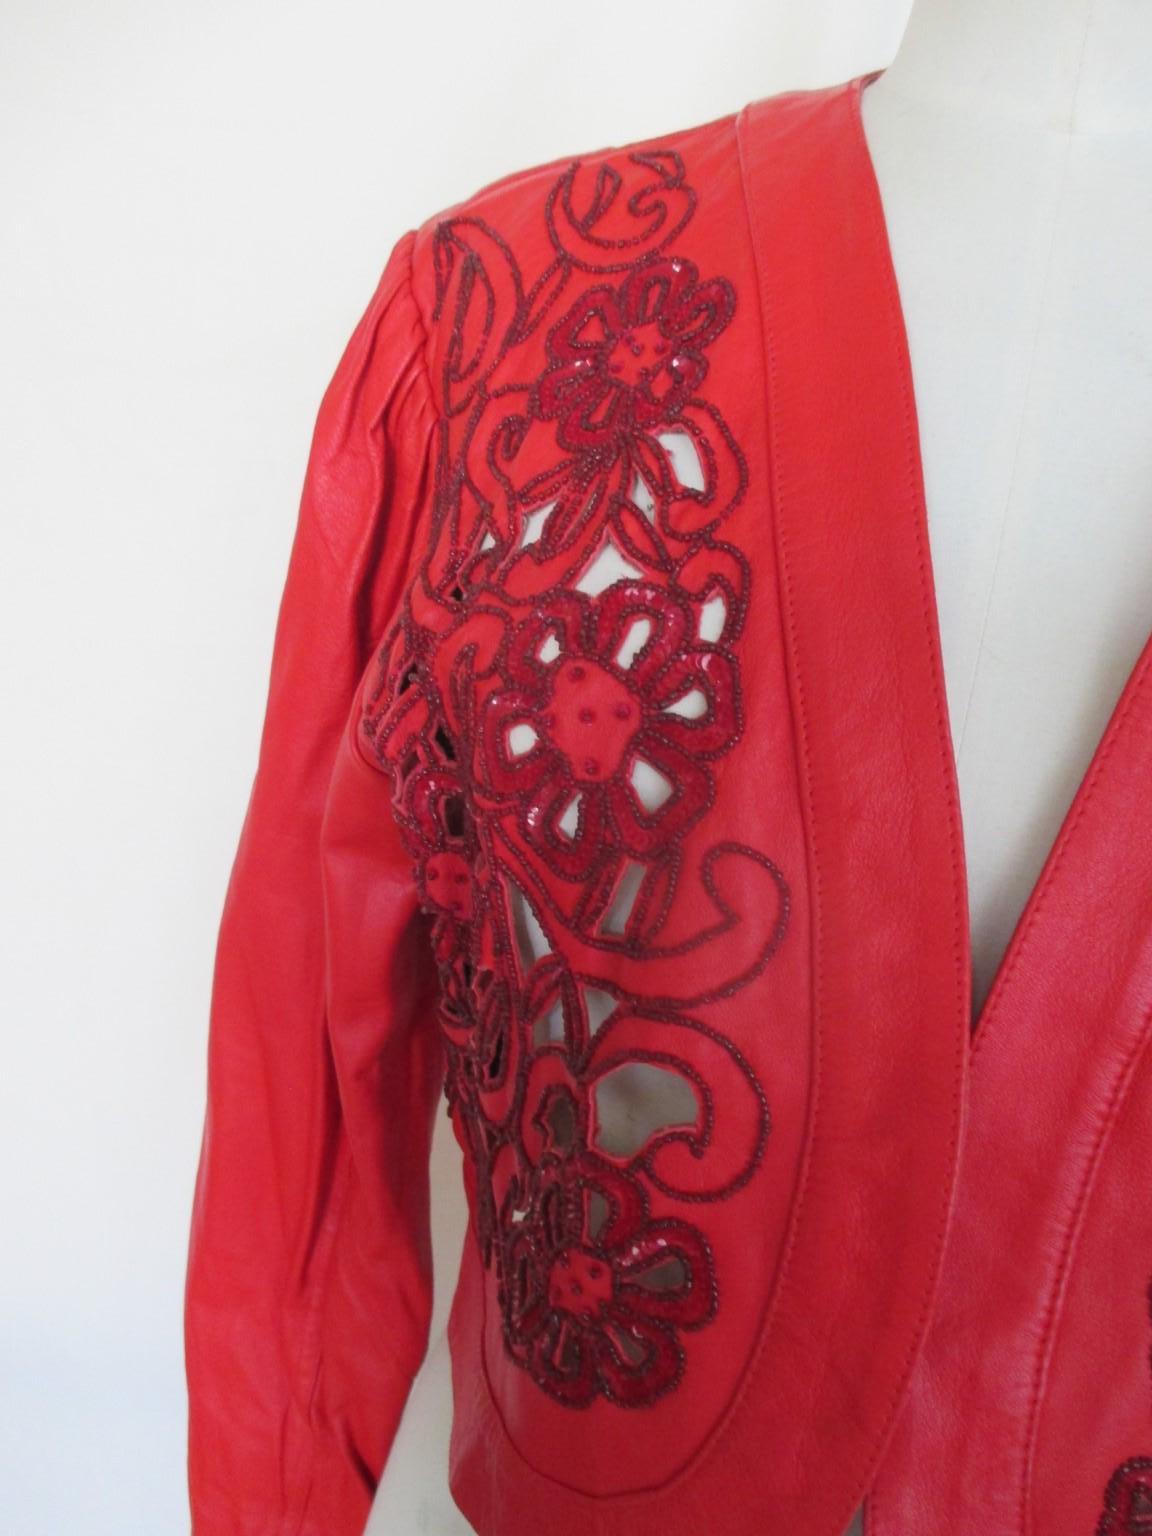 Women's or Men's Embroidered Beaded Red Leather Bolero Jacket For Sale